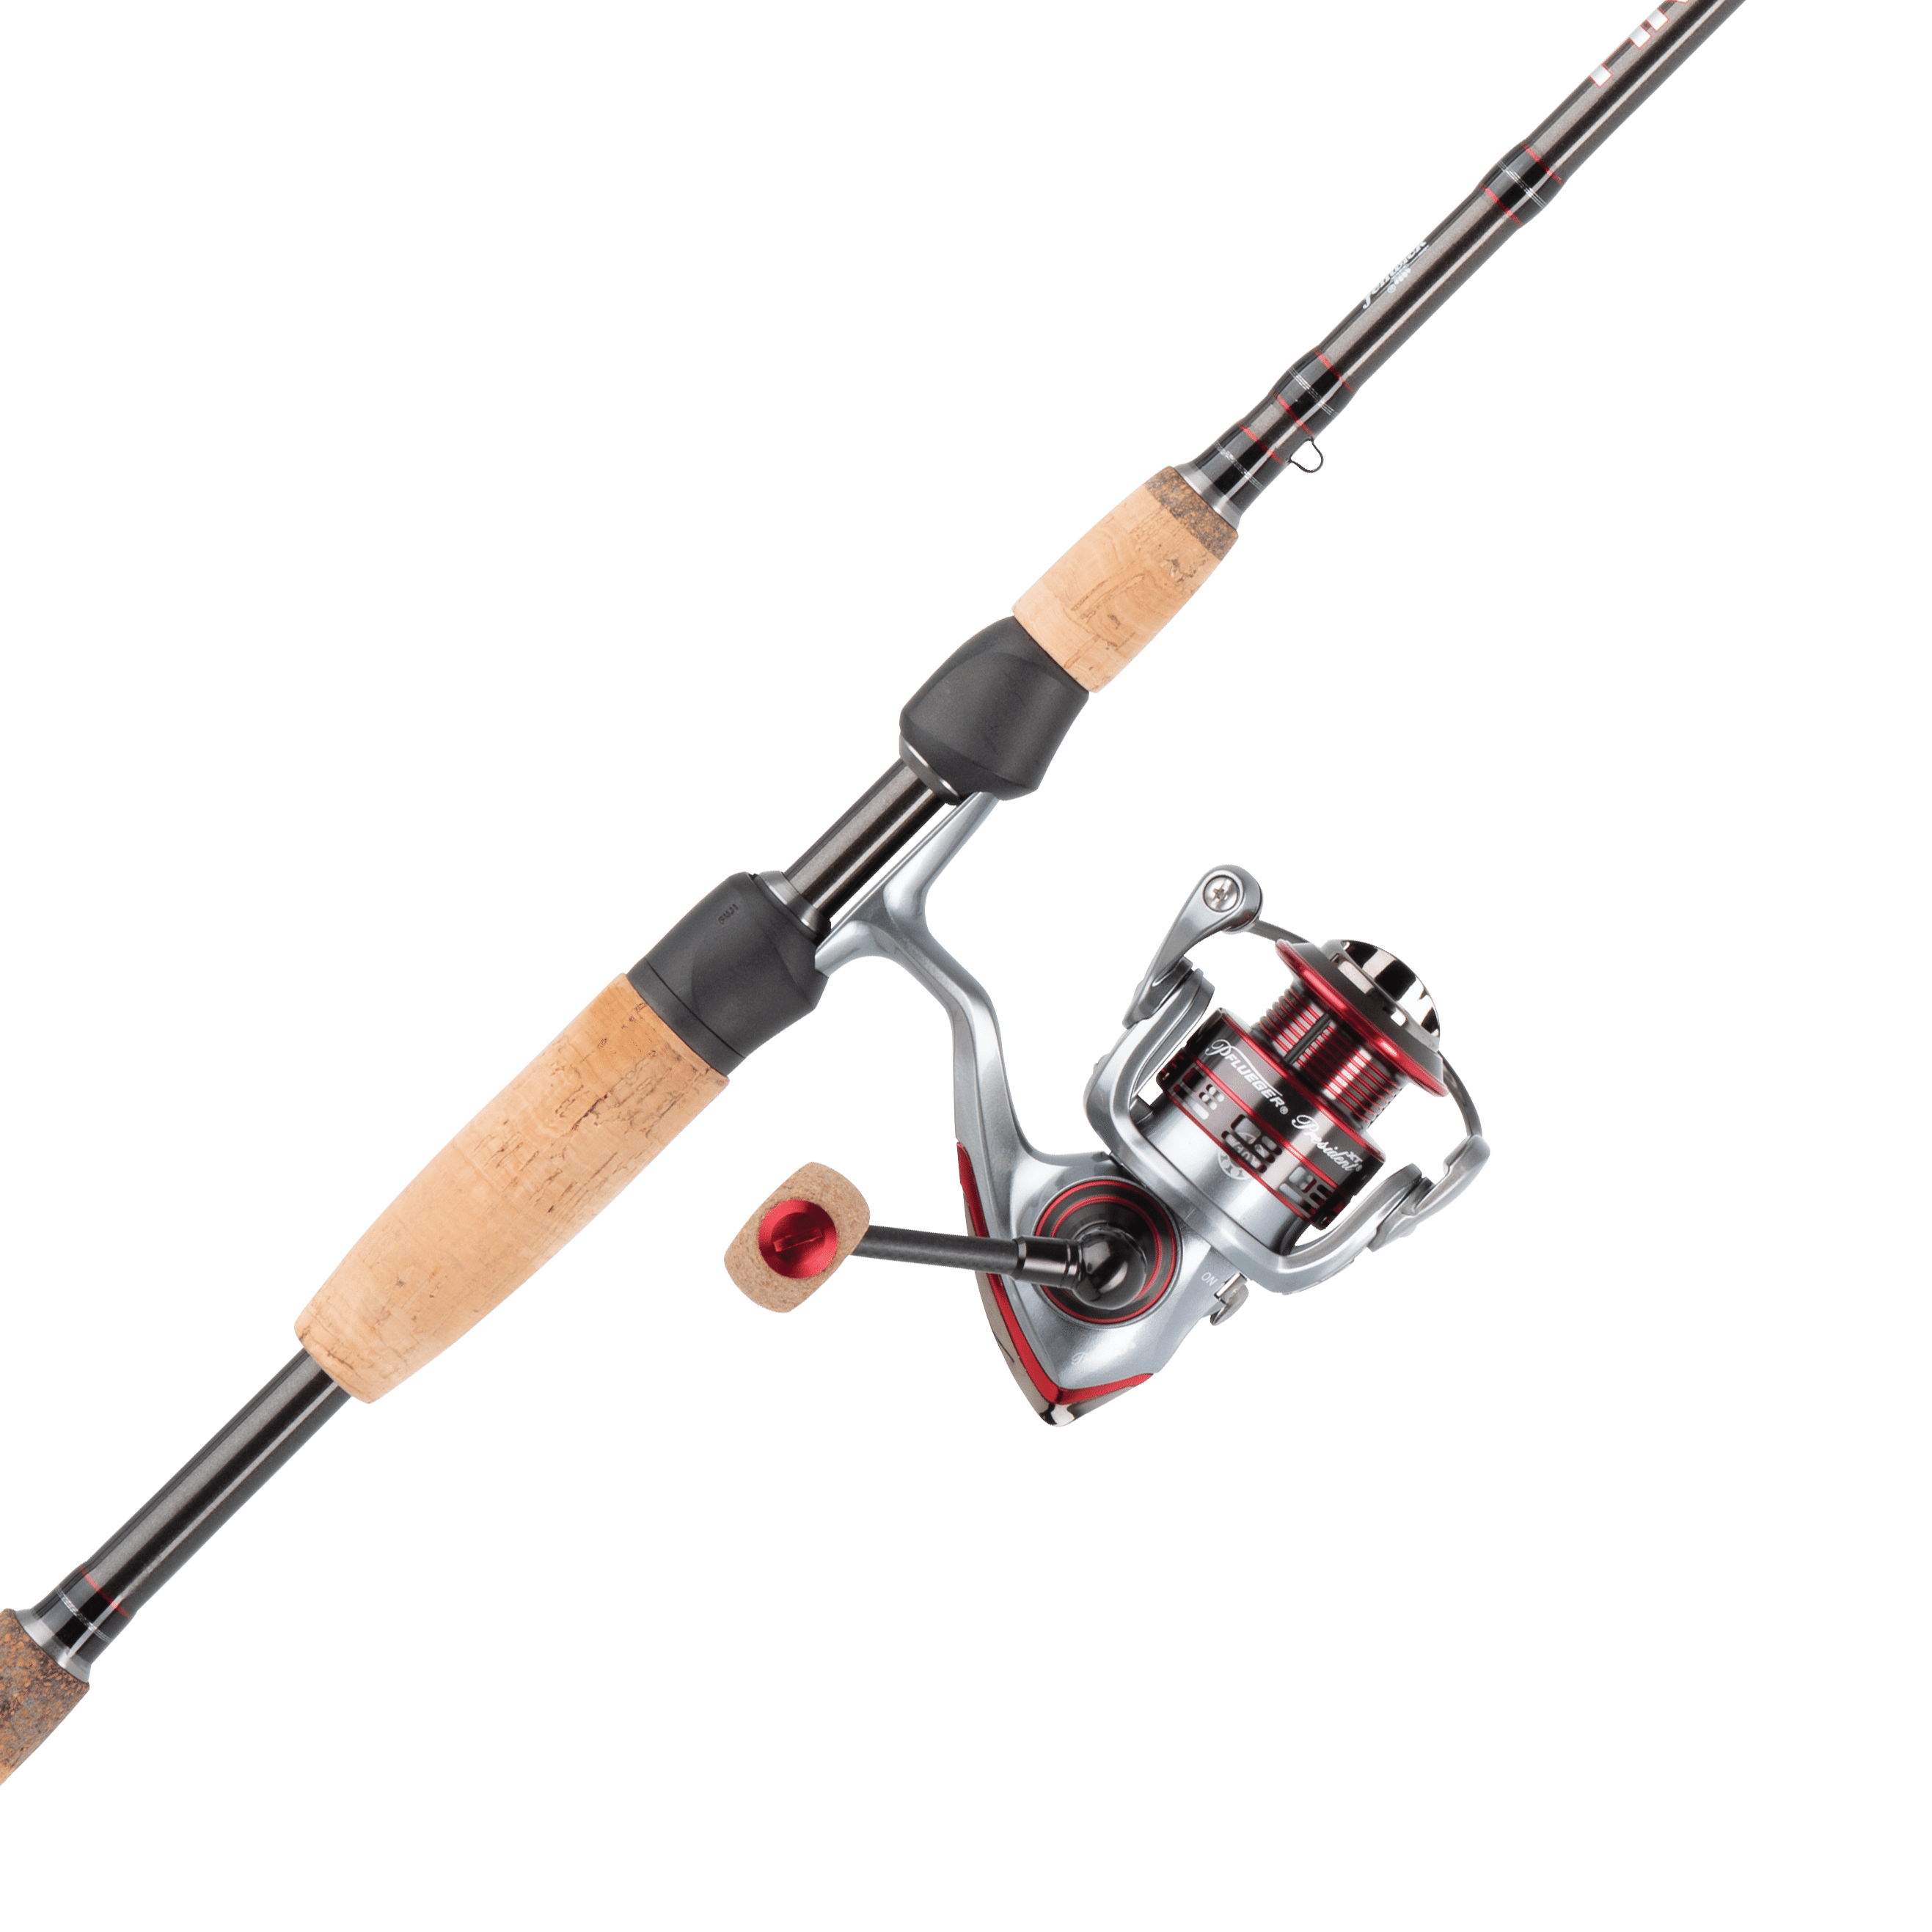 Pflueger 6'6 Trion Spinning Rod and Reel Combo, Size 30 Reel